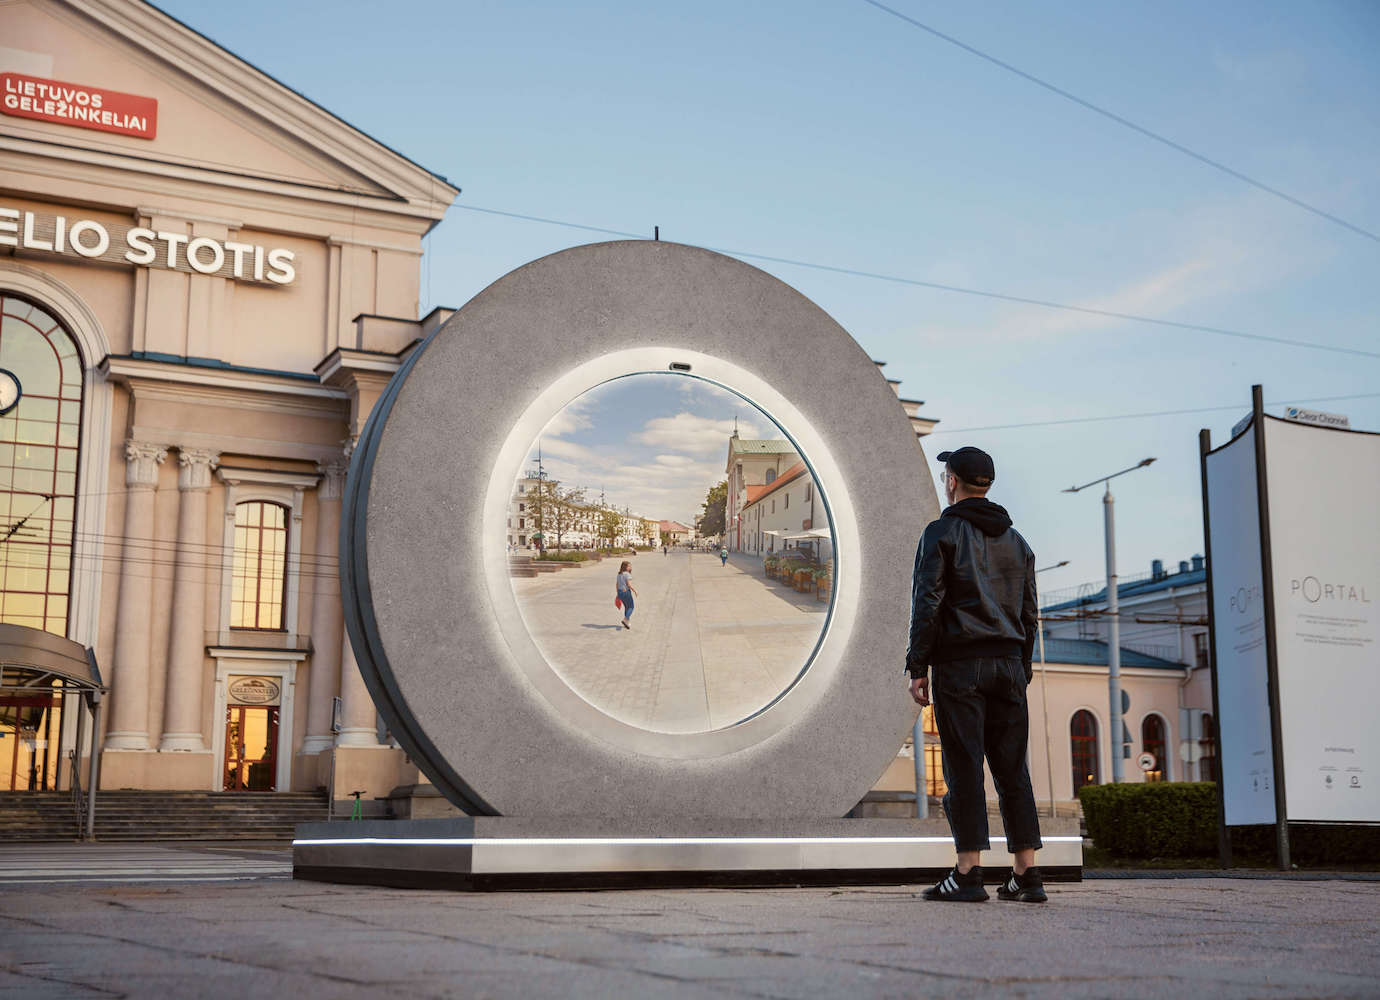 This high-tech portal between Poland and Lithuania is the sci-fi invention we’ve been waiting for